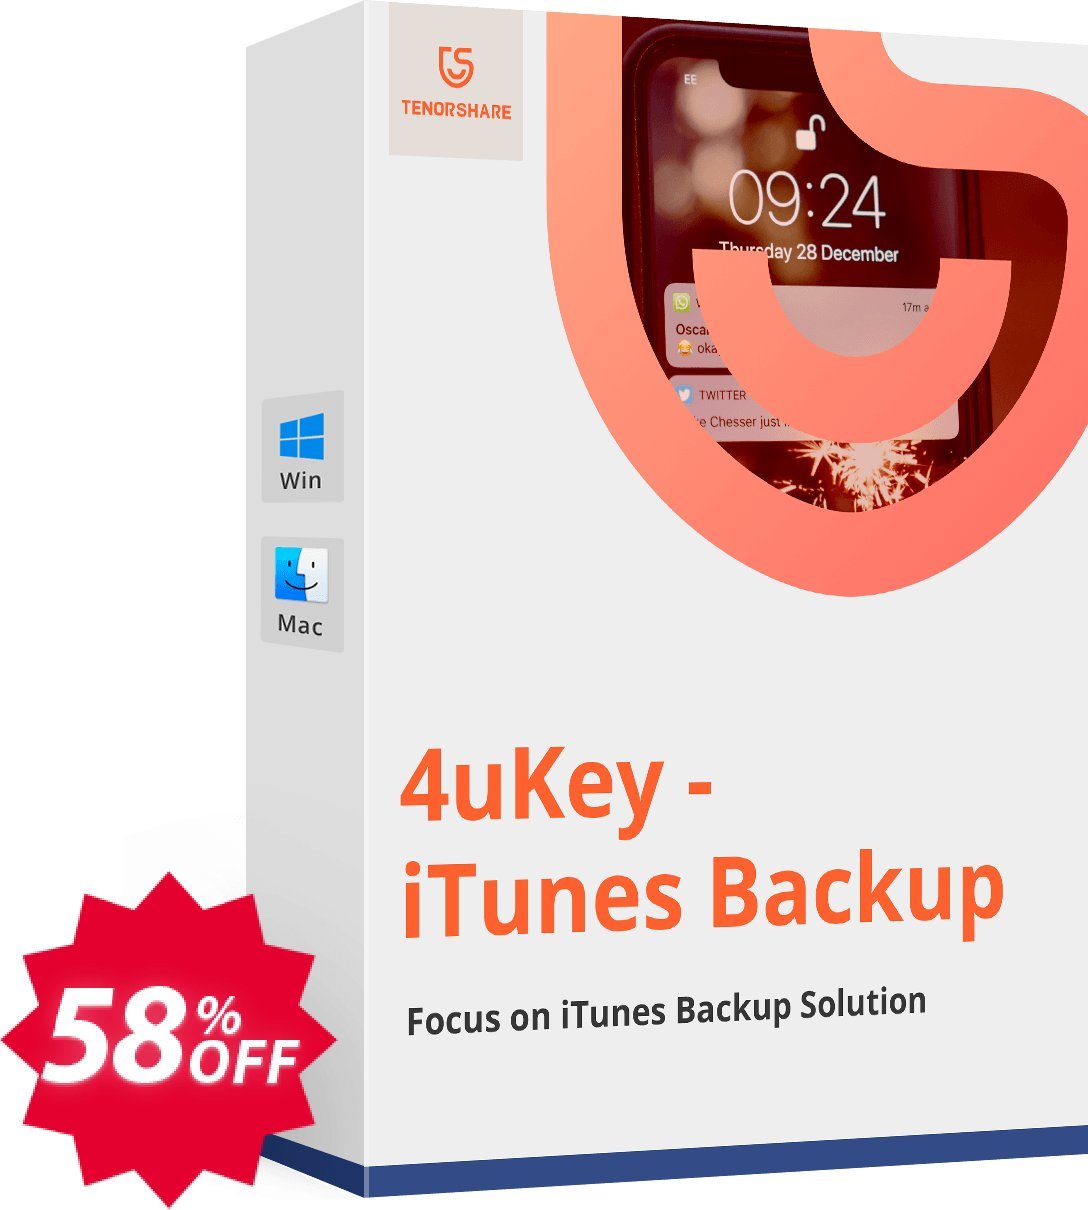 Tenorshare 4uKey iTunes Backup, Monthly Plan  Coupon code 58% discount 